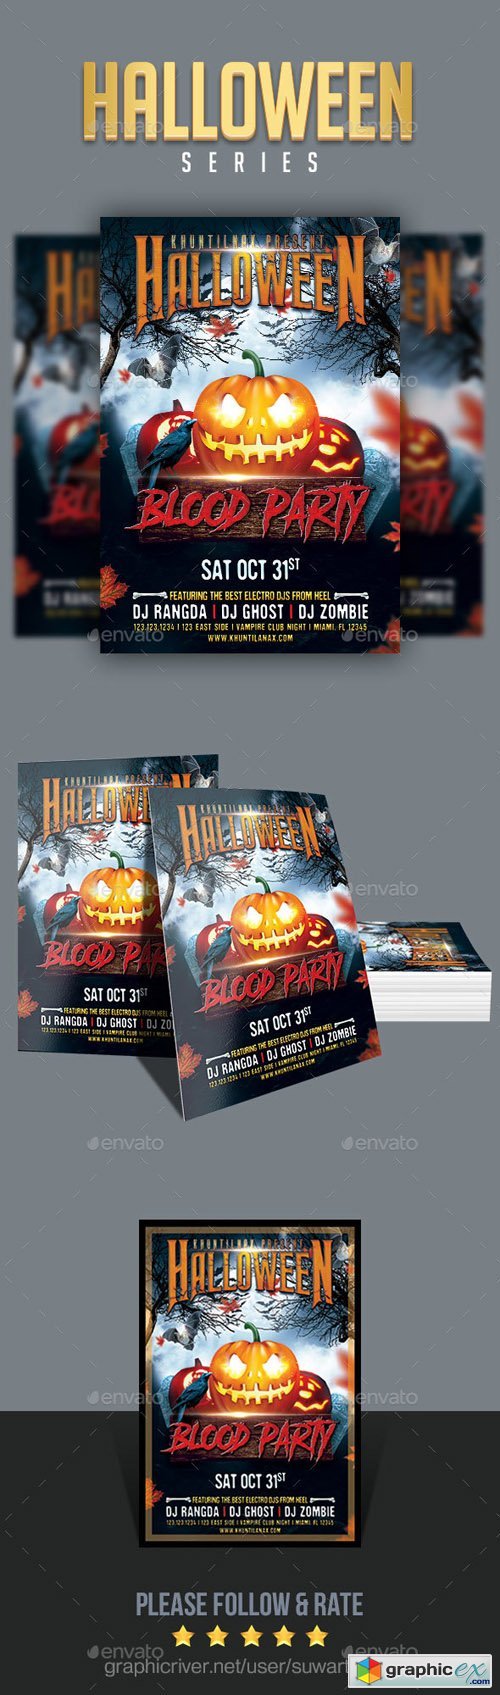 Halloween Blood Party Flyer